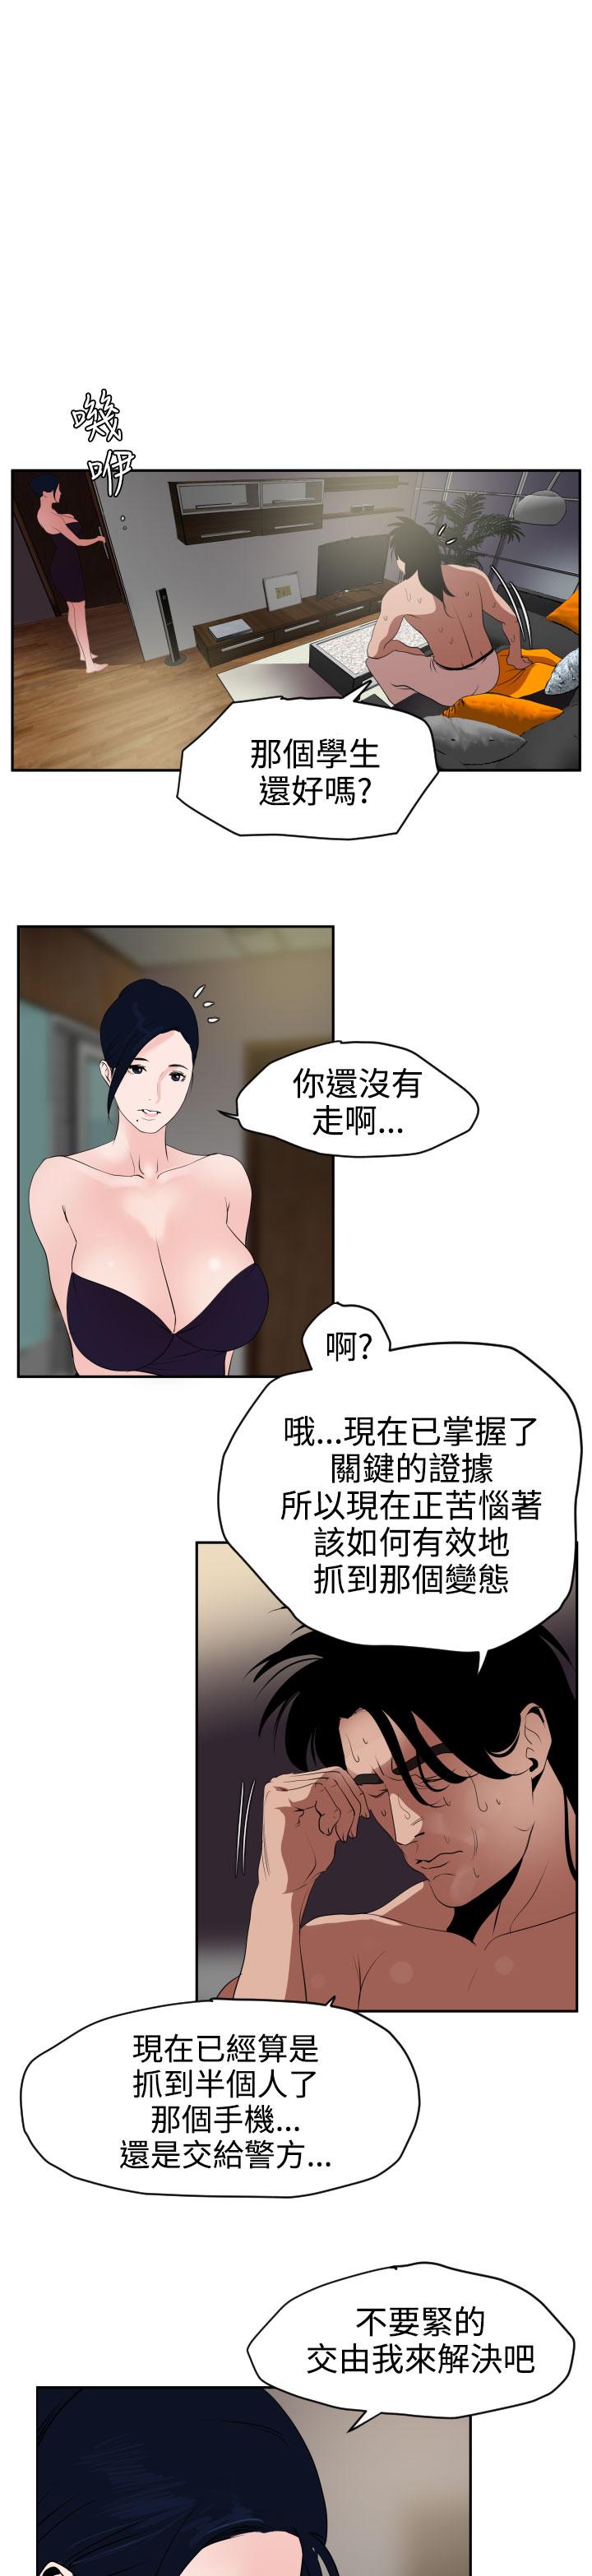 Desire King (慾求王) Ch.1-16 (chinese) 451